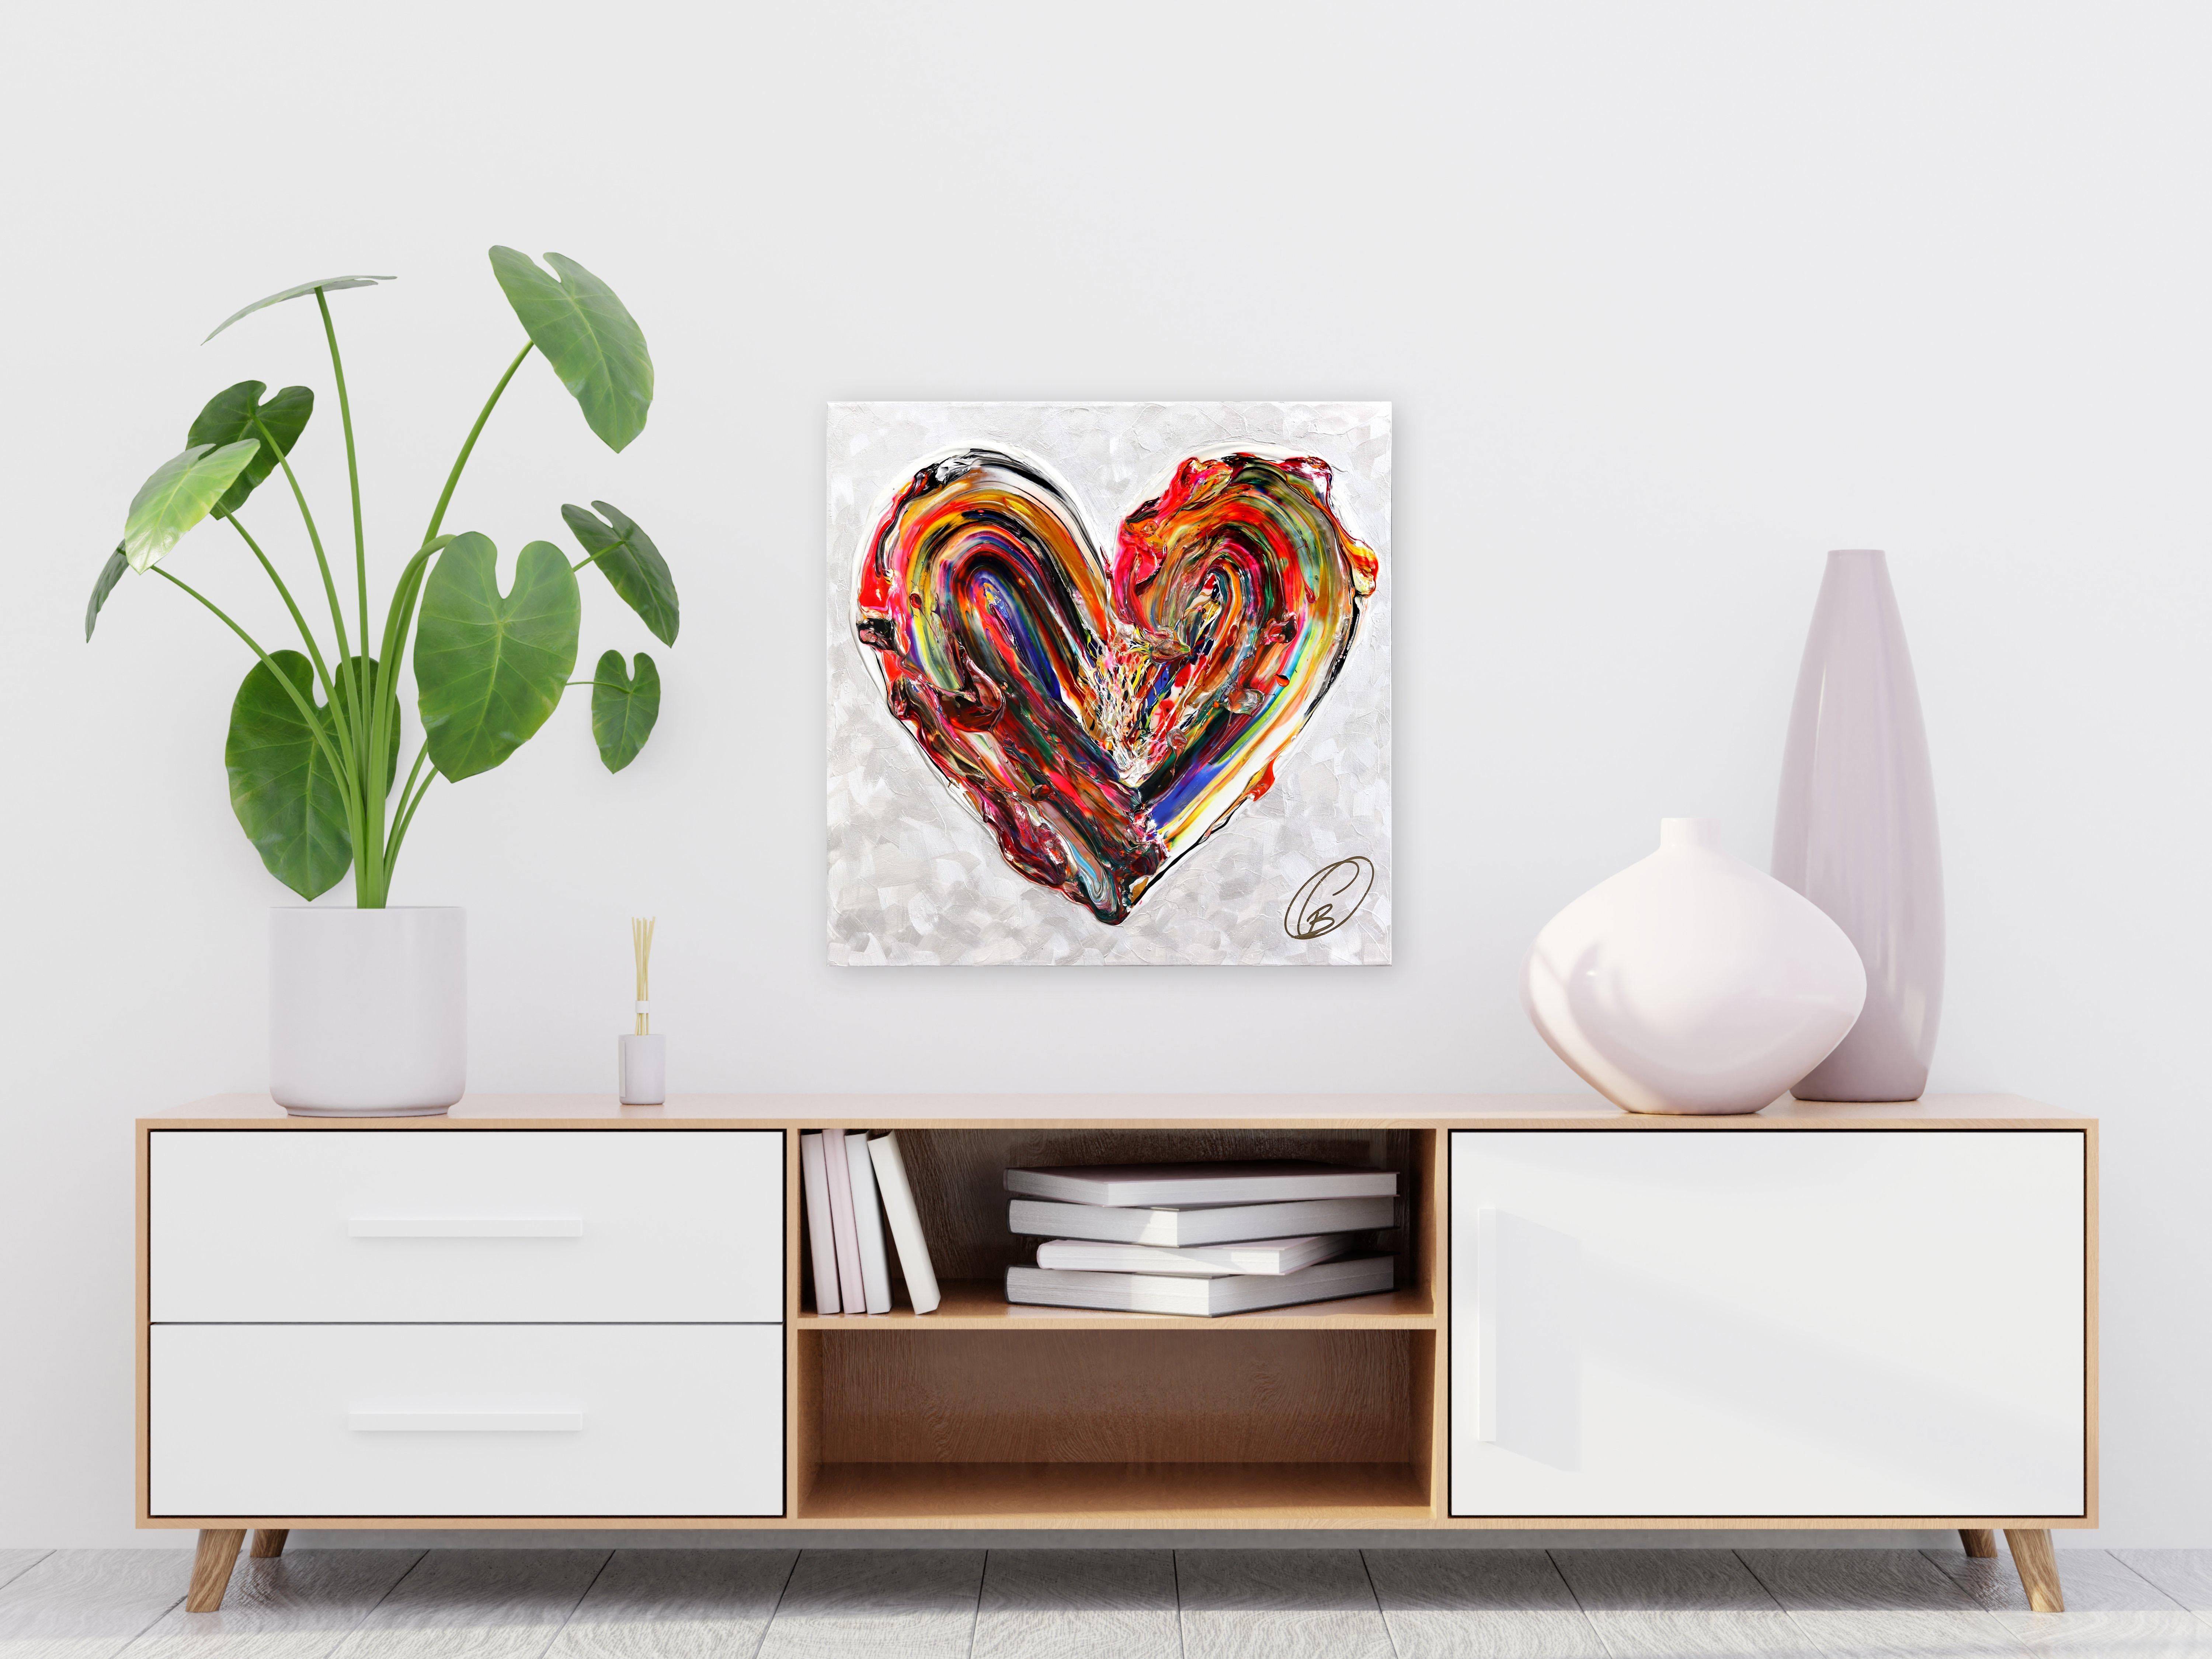 You Are The One That I've Been Waiting For - Colorful Thick Paint Heart Artwork - Painting by Cynthia Coulombe Bégin